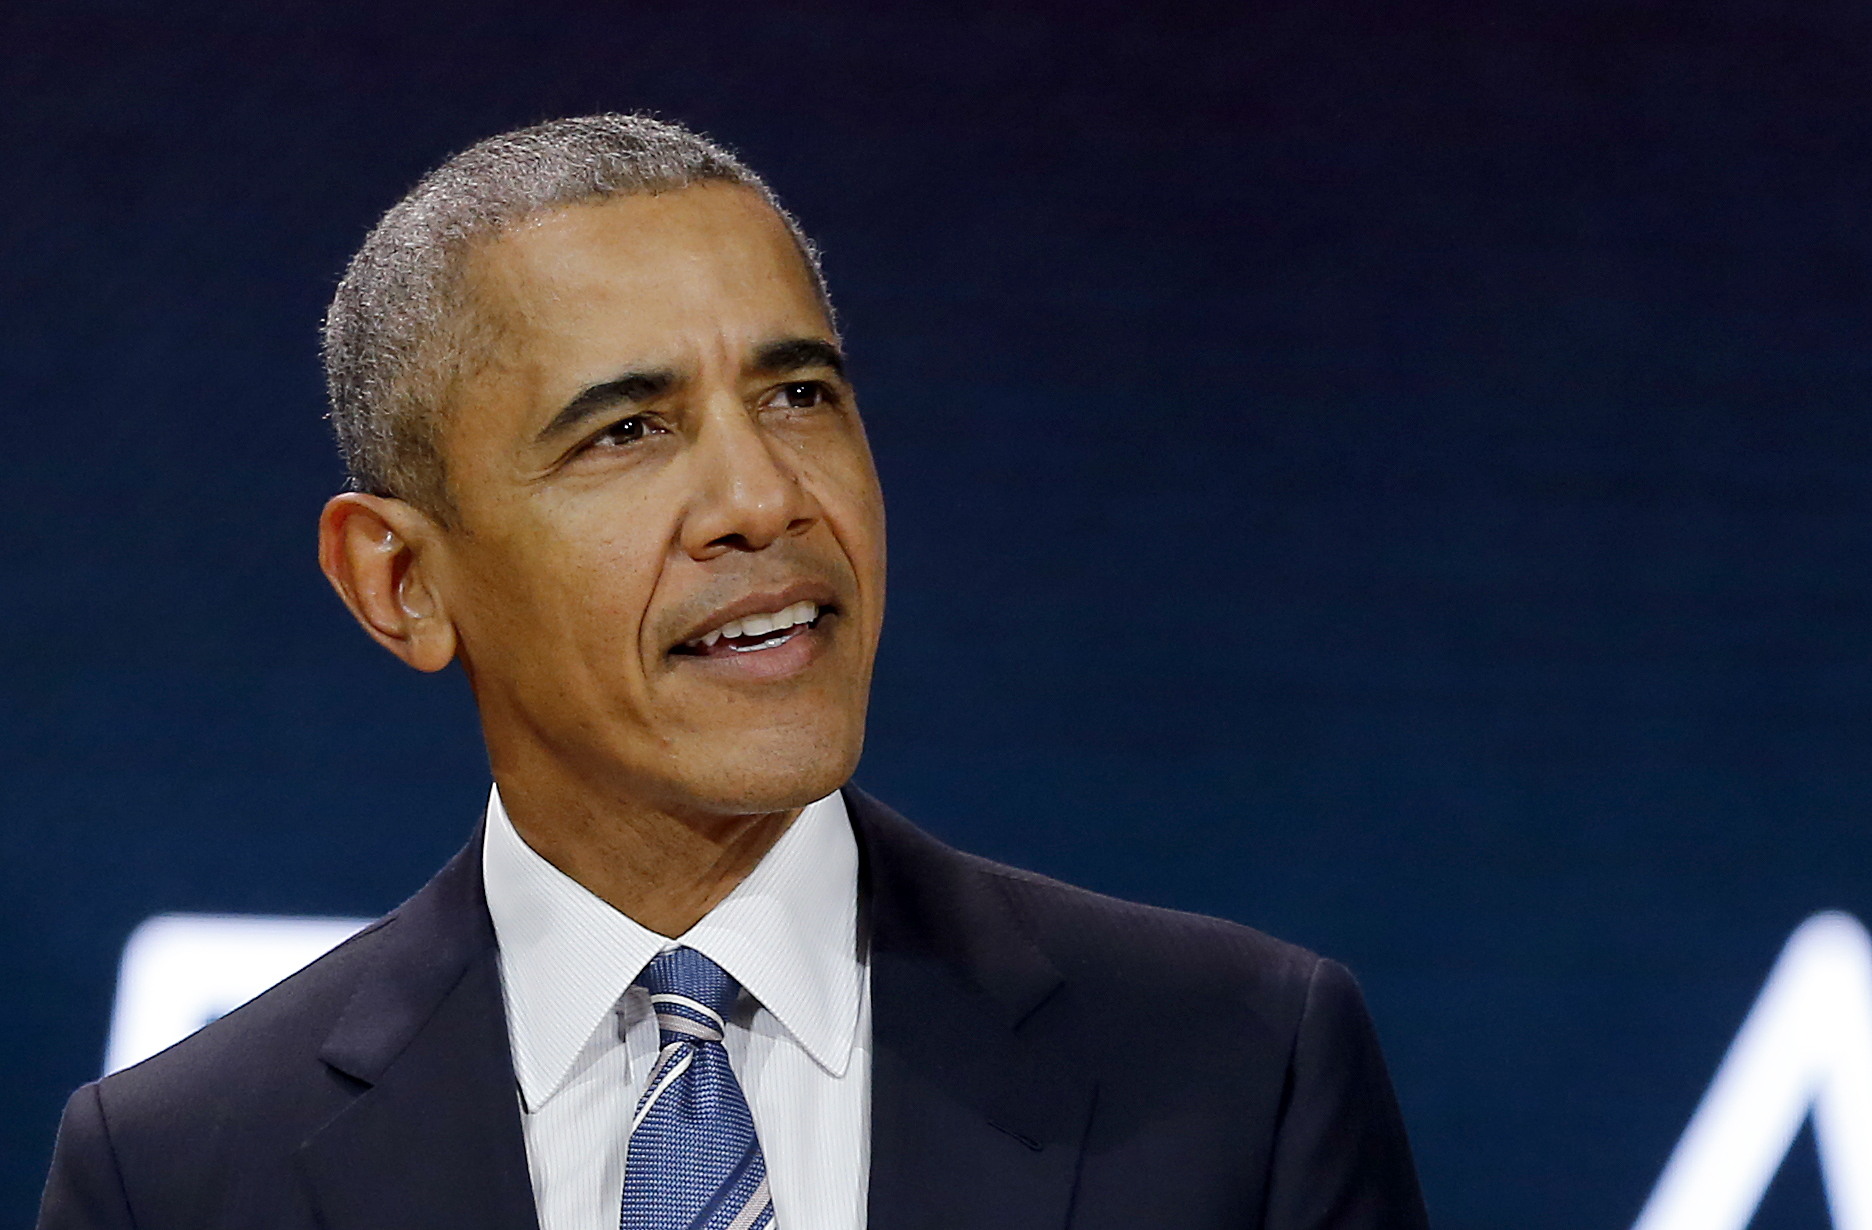 Barack Obama delivers a speech in Paris, France. (Chesnot—Getty Images)